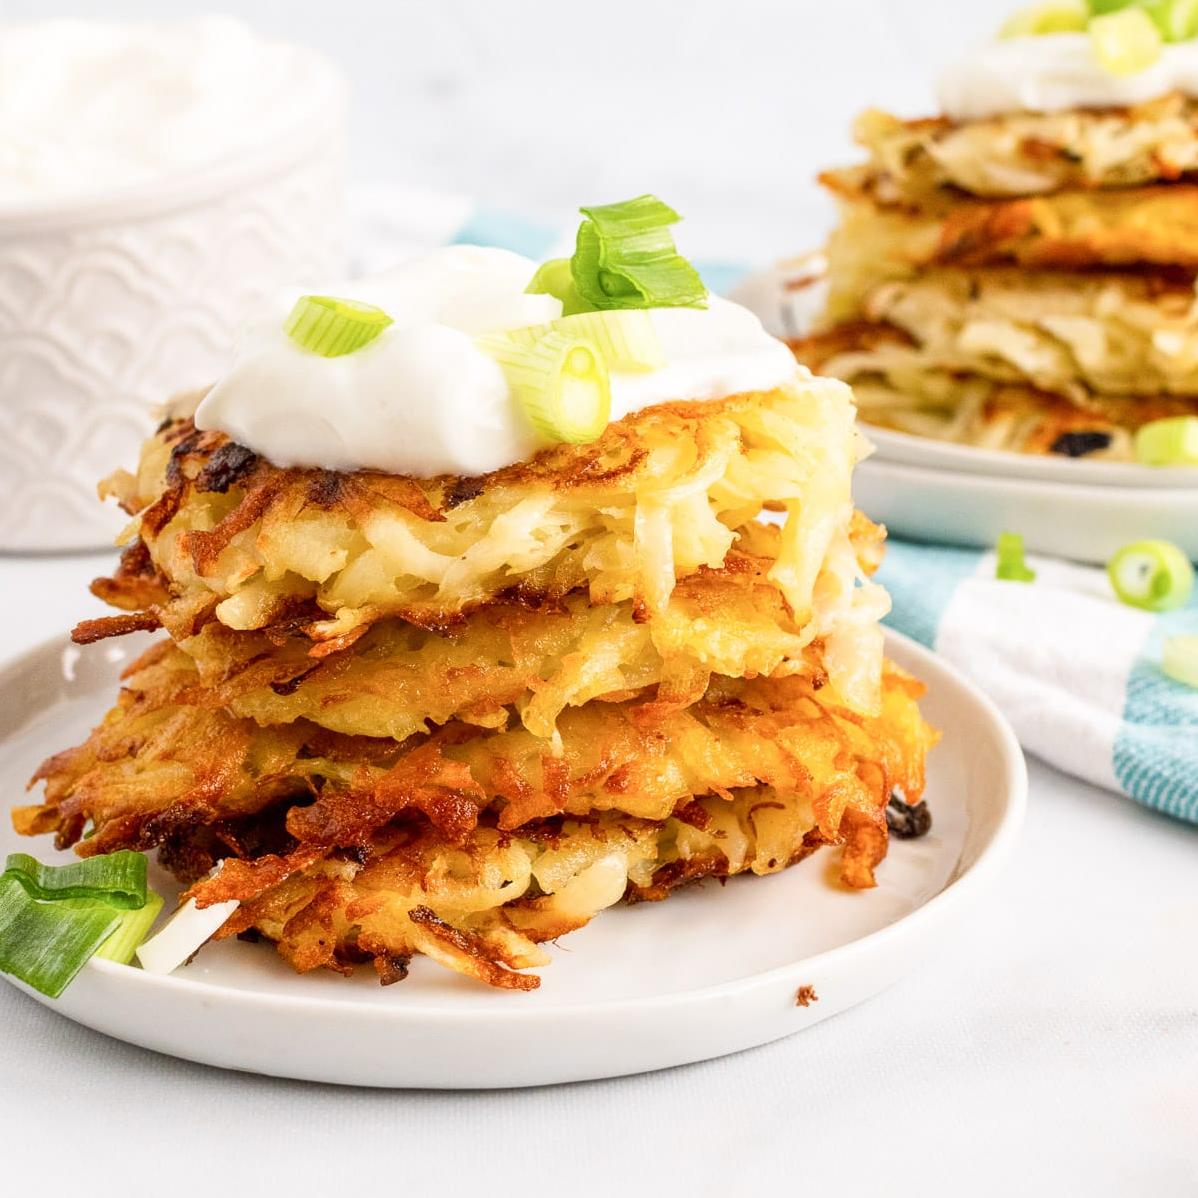  Mouth-watering vegan potato pancakes that are gluten-free can be served as a side or the main course.